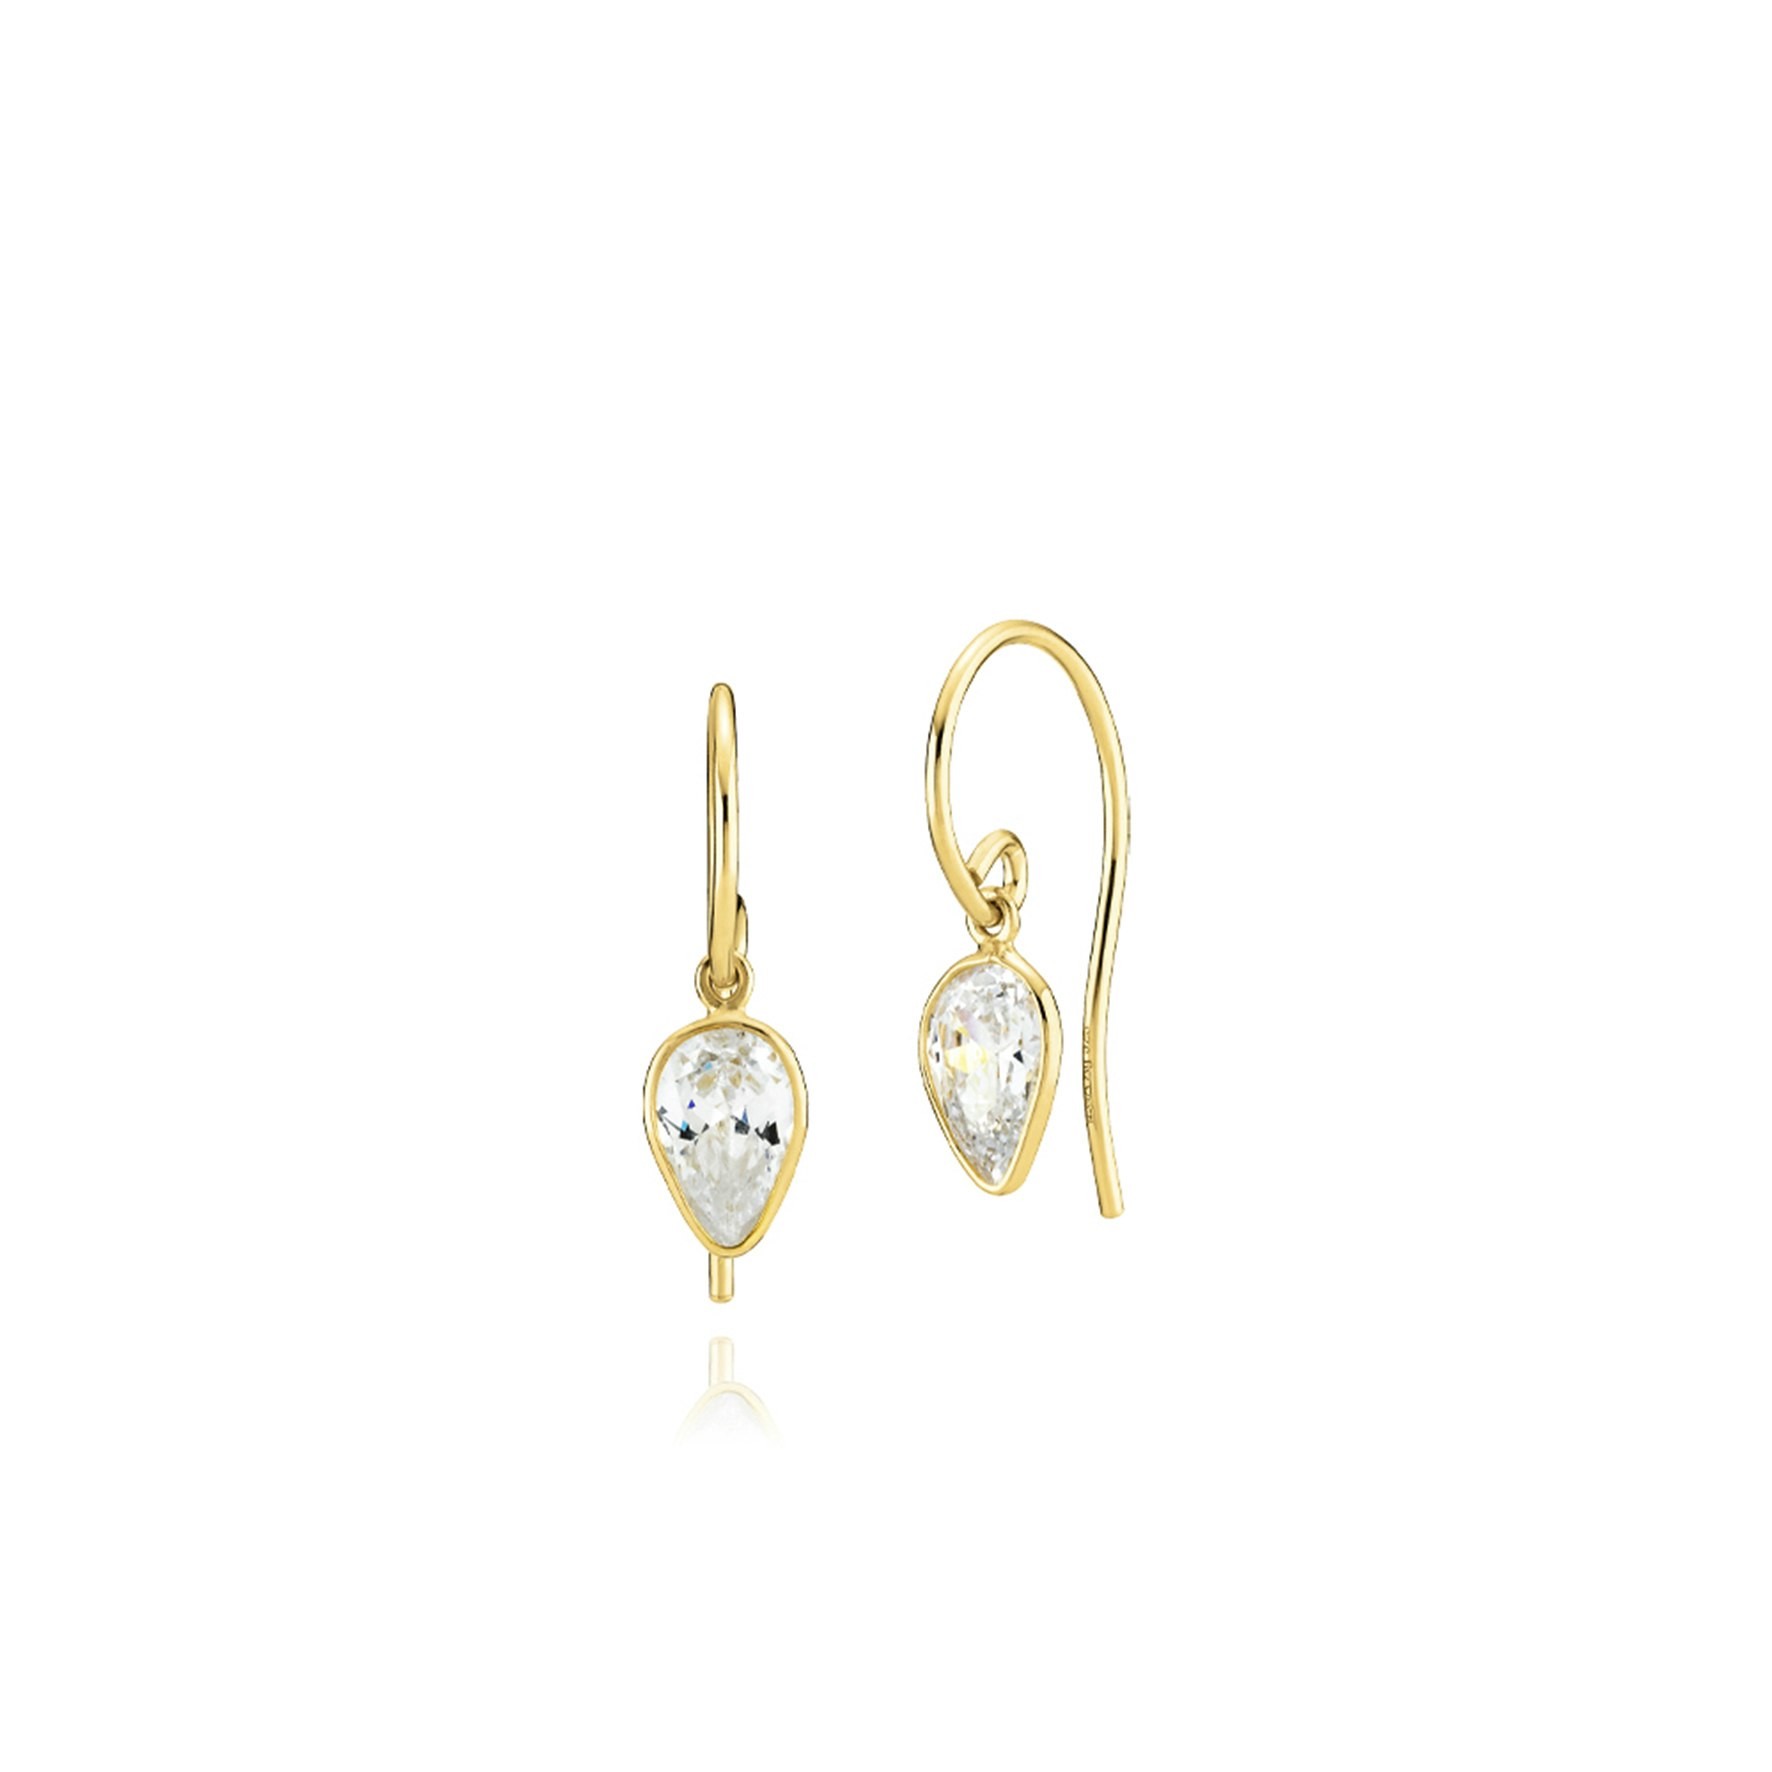 Aya Small Earrings from Izabel Camille in Goldplated Silver Sterling 925